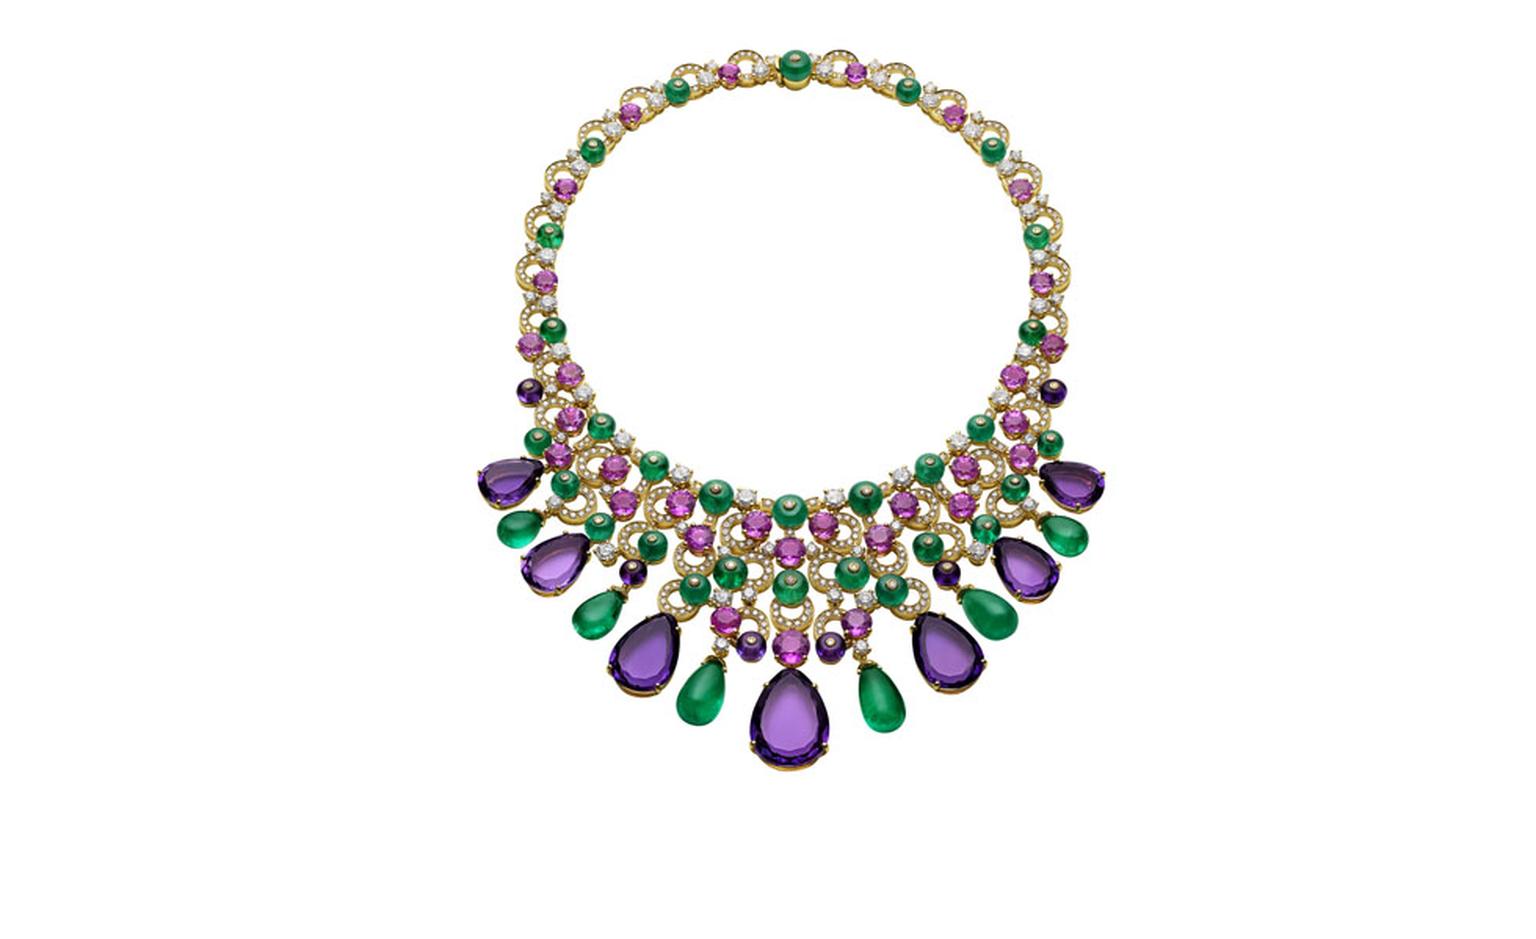 Bulgari. High Jewellery necklace in yellow gold with 6 cabochon emerald drops, pear-shaped amethysts, 30 round cut pink sapphires, emerald beads, amethyst beads, round brilliant cut and pave´ diamonds. POA.